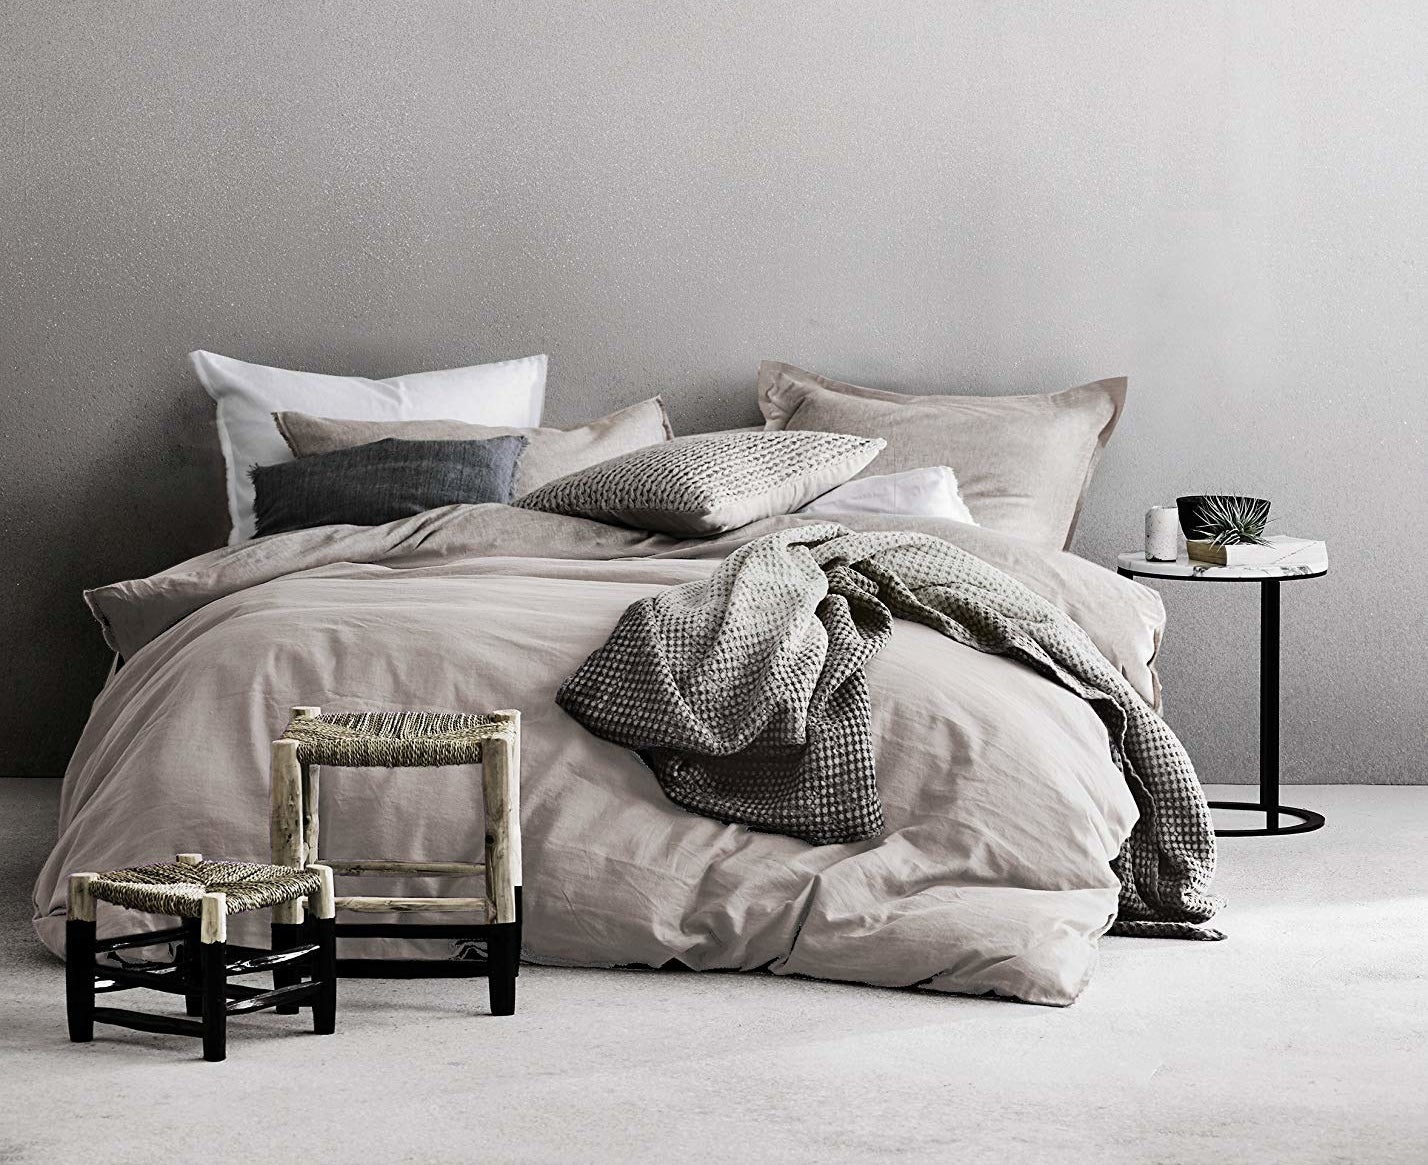 the grey duvet set with pillows and a blanket in different shades of grey